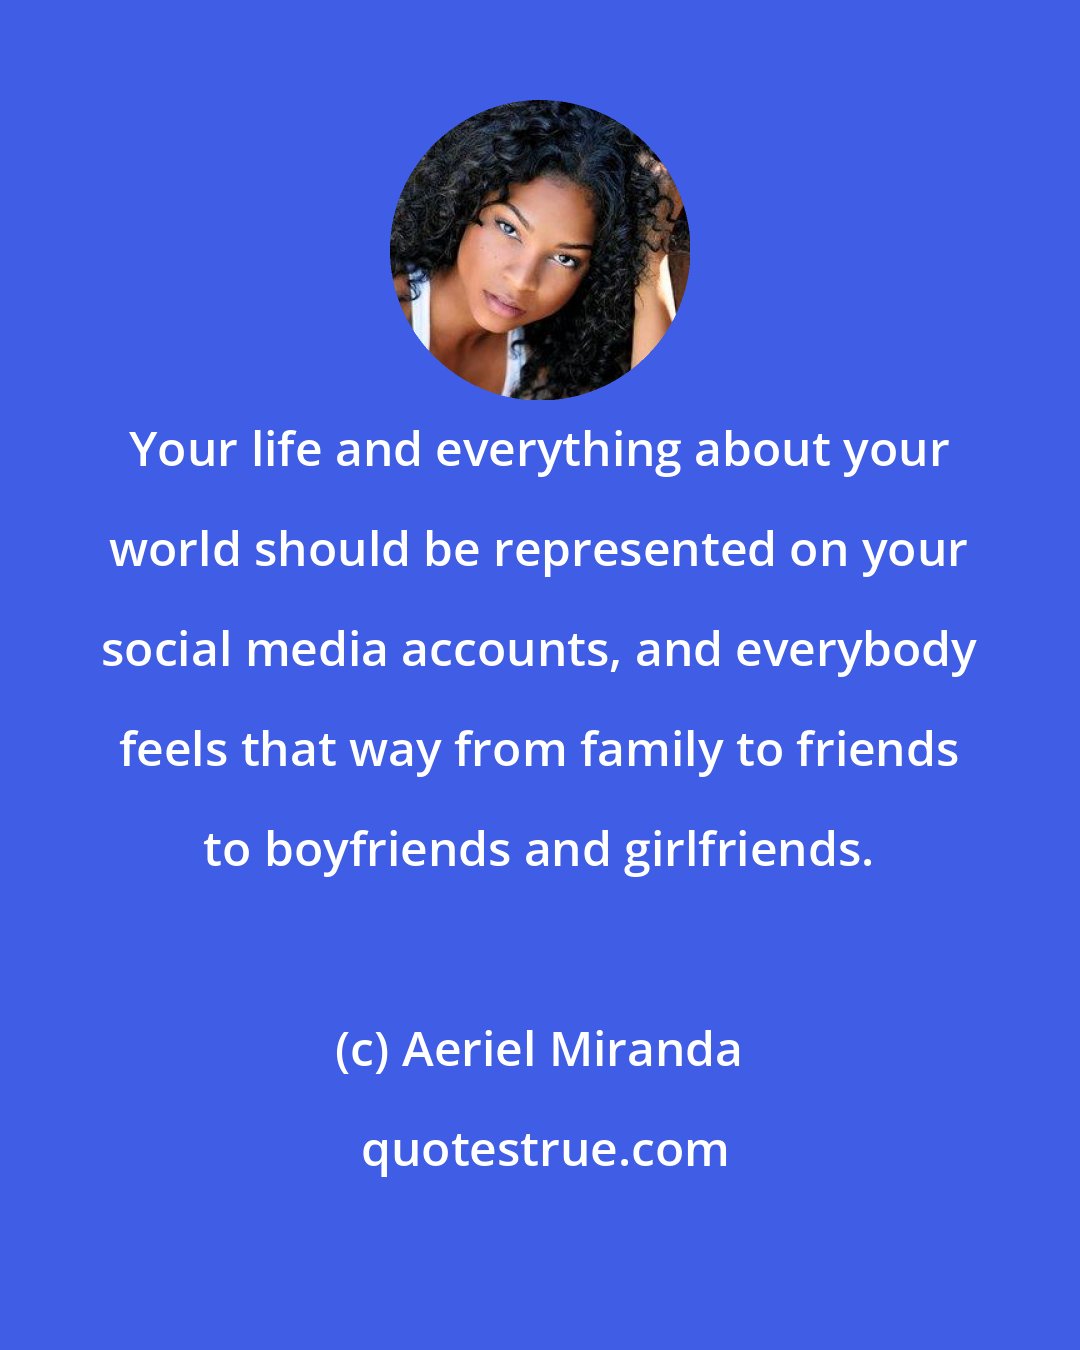 Aeriel Miranda: Your life and everything about your world should be represented on your social media accounts, and everybody feels that way from family to friends to boyfriends and girlfriends.